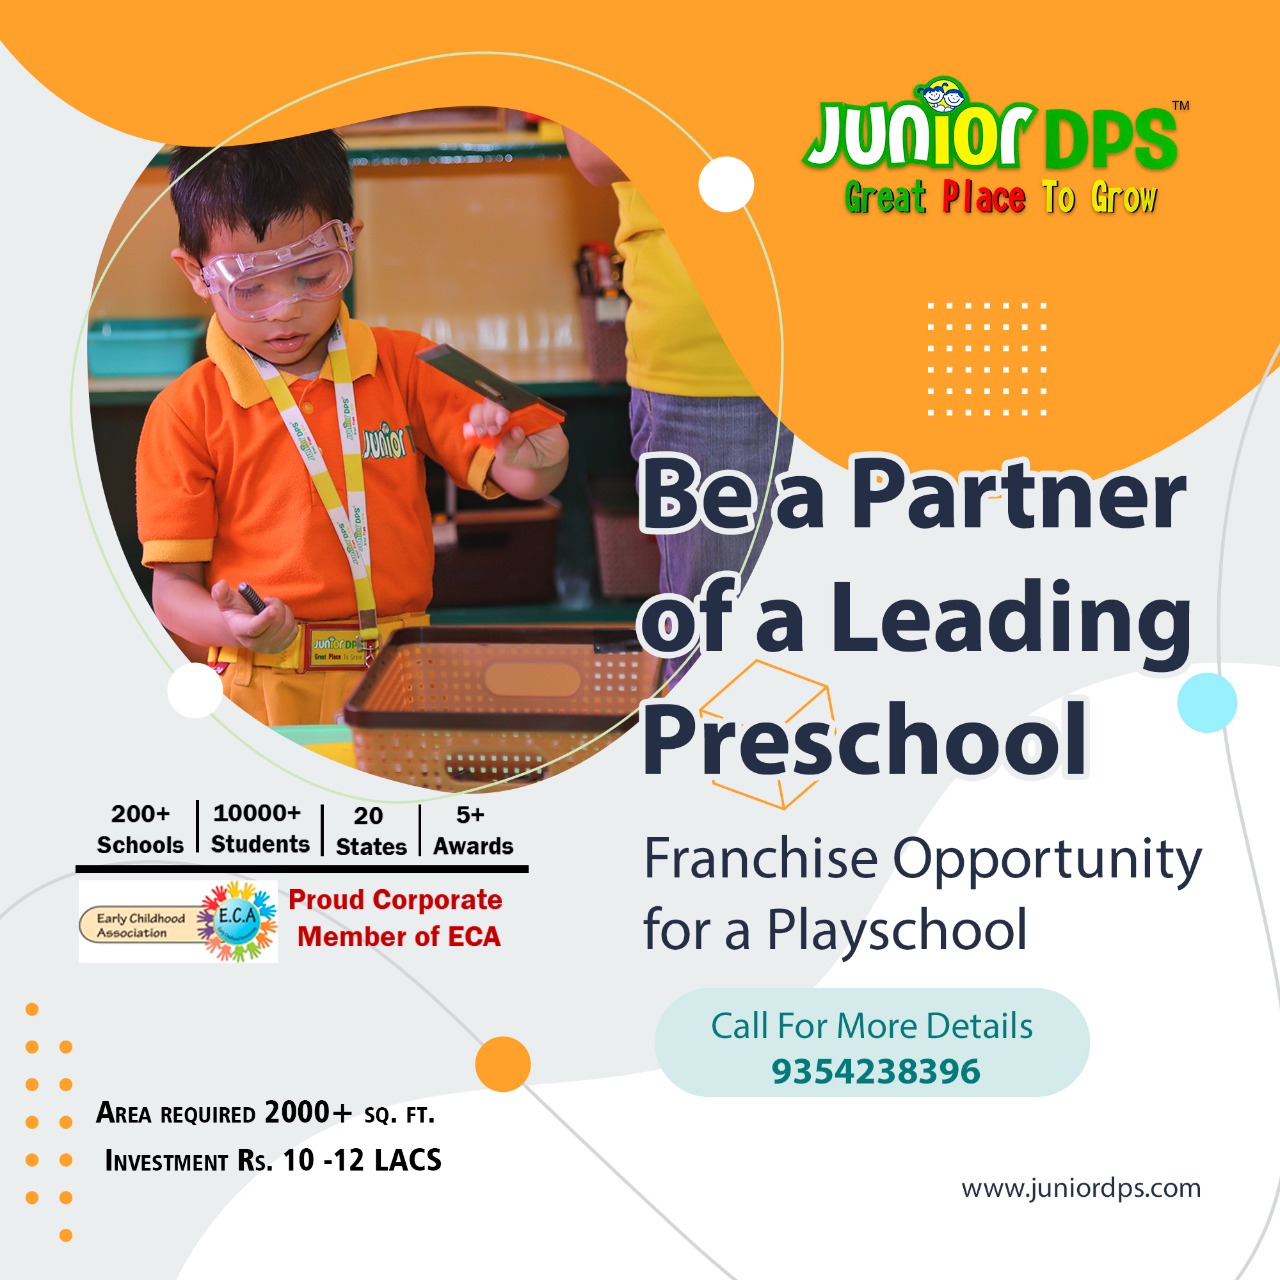 JuniorDPS Junior DPS is a chain of preschools whose commitment and determination towards delivering high-quality education and appropriate nurturing to children has ascended its name to the national level.
www.juniordps.com by JuniorDps123